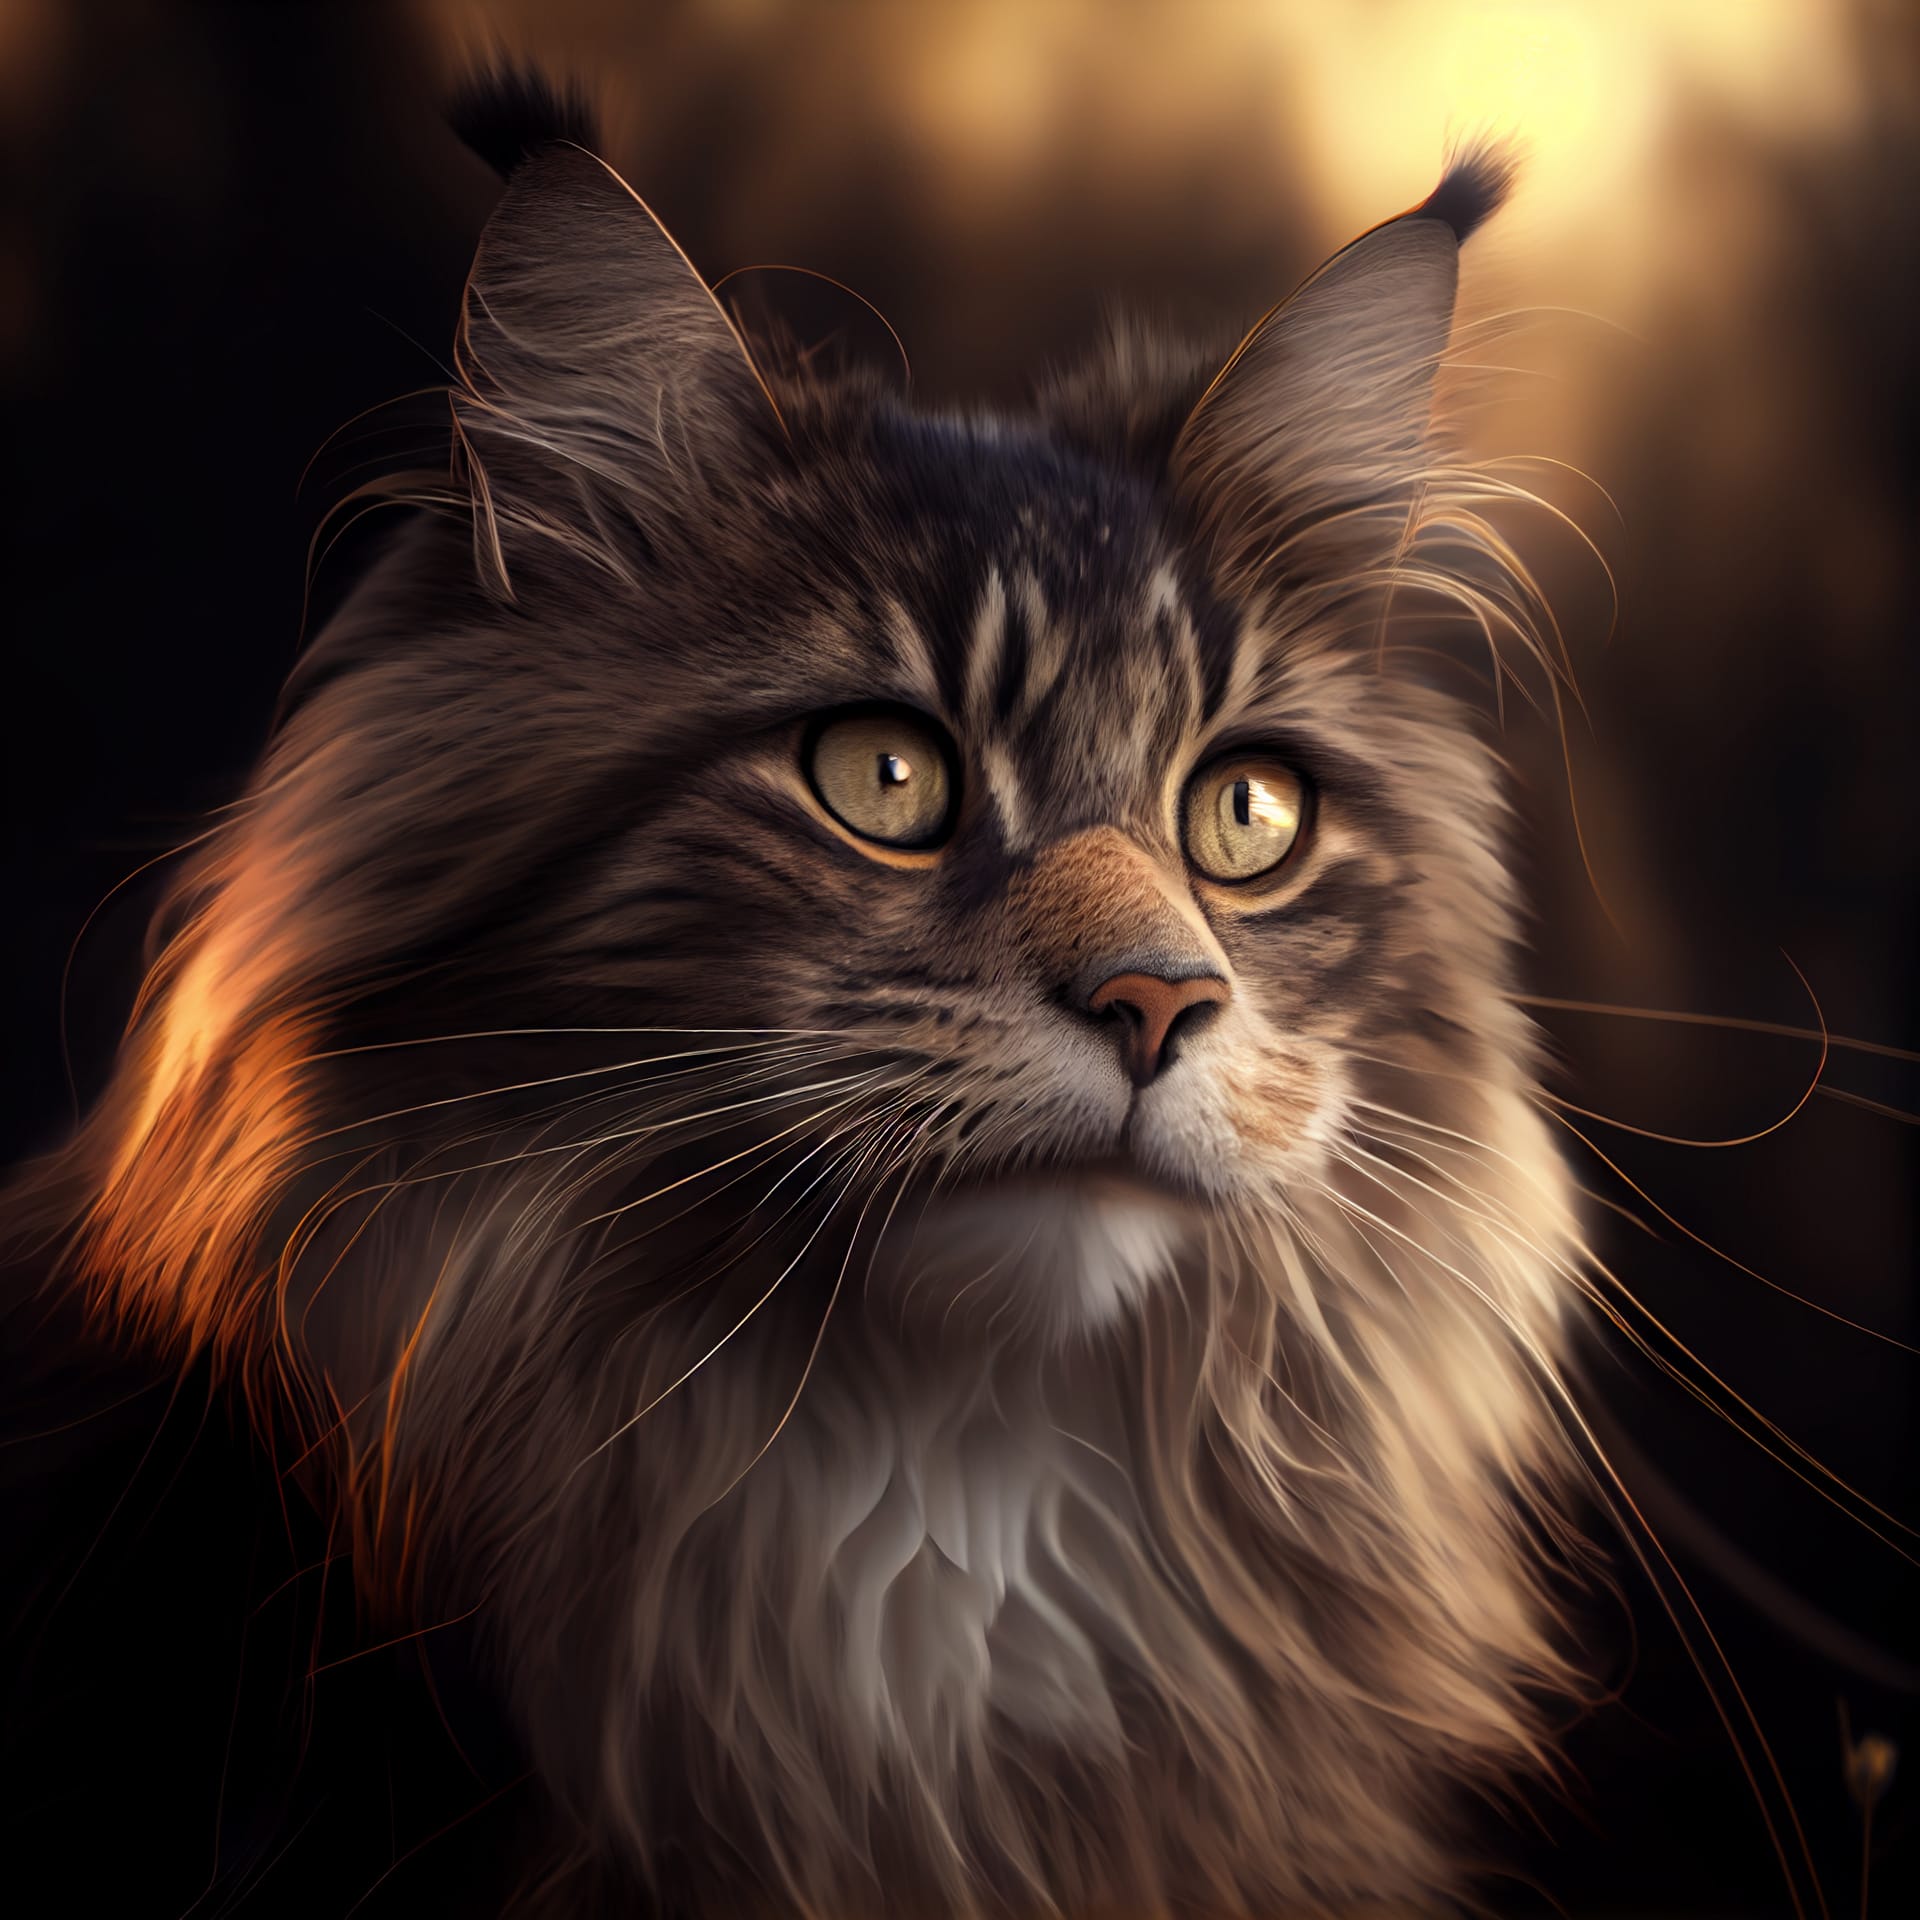 Norwegian forest cat breeds adorable image cat with sparkling eyes